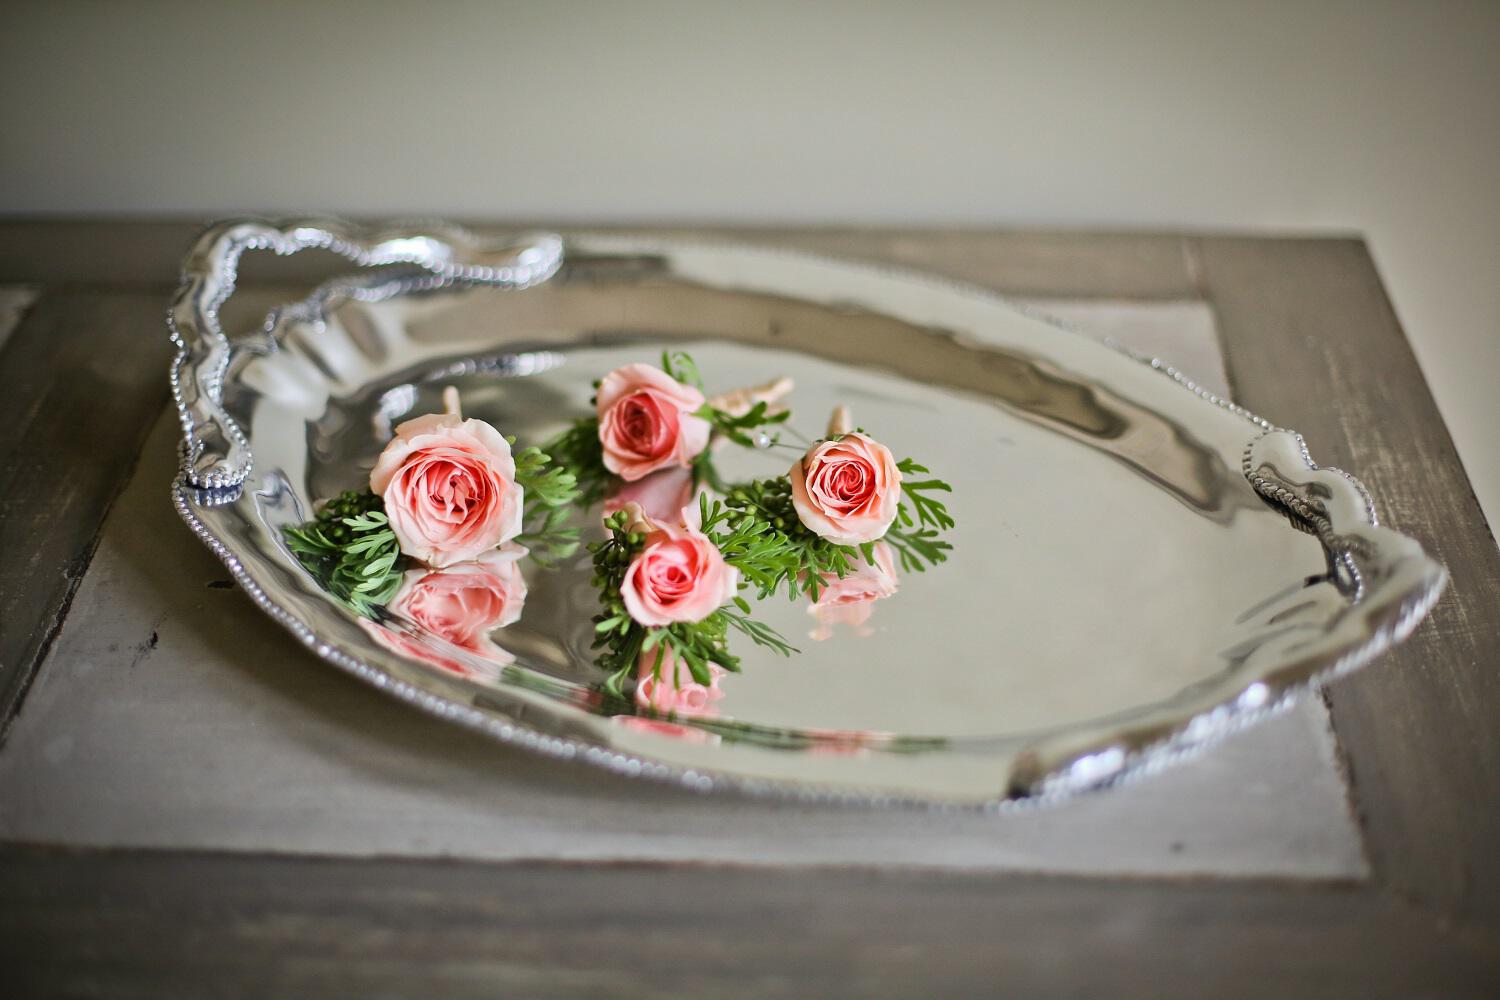 PEARL Denisse Oval Tray with Handles